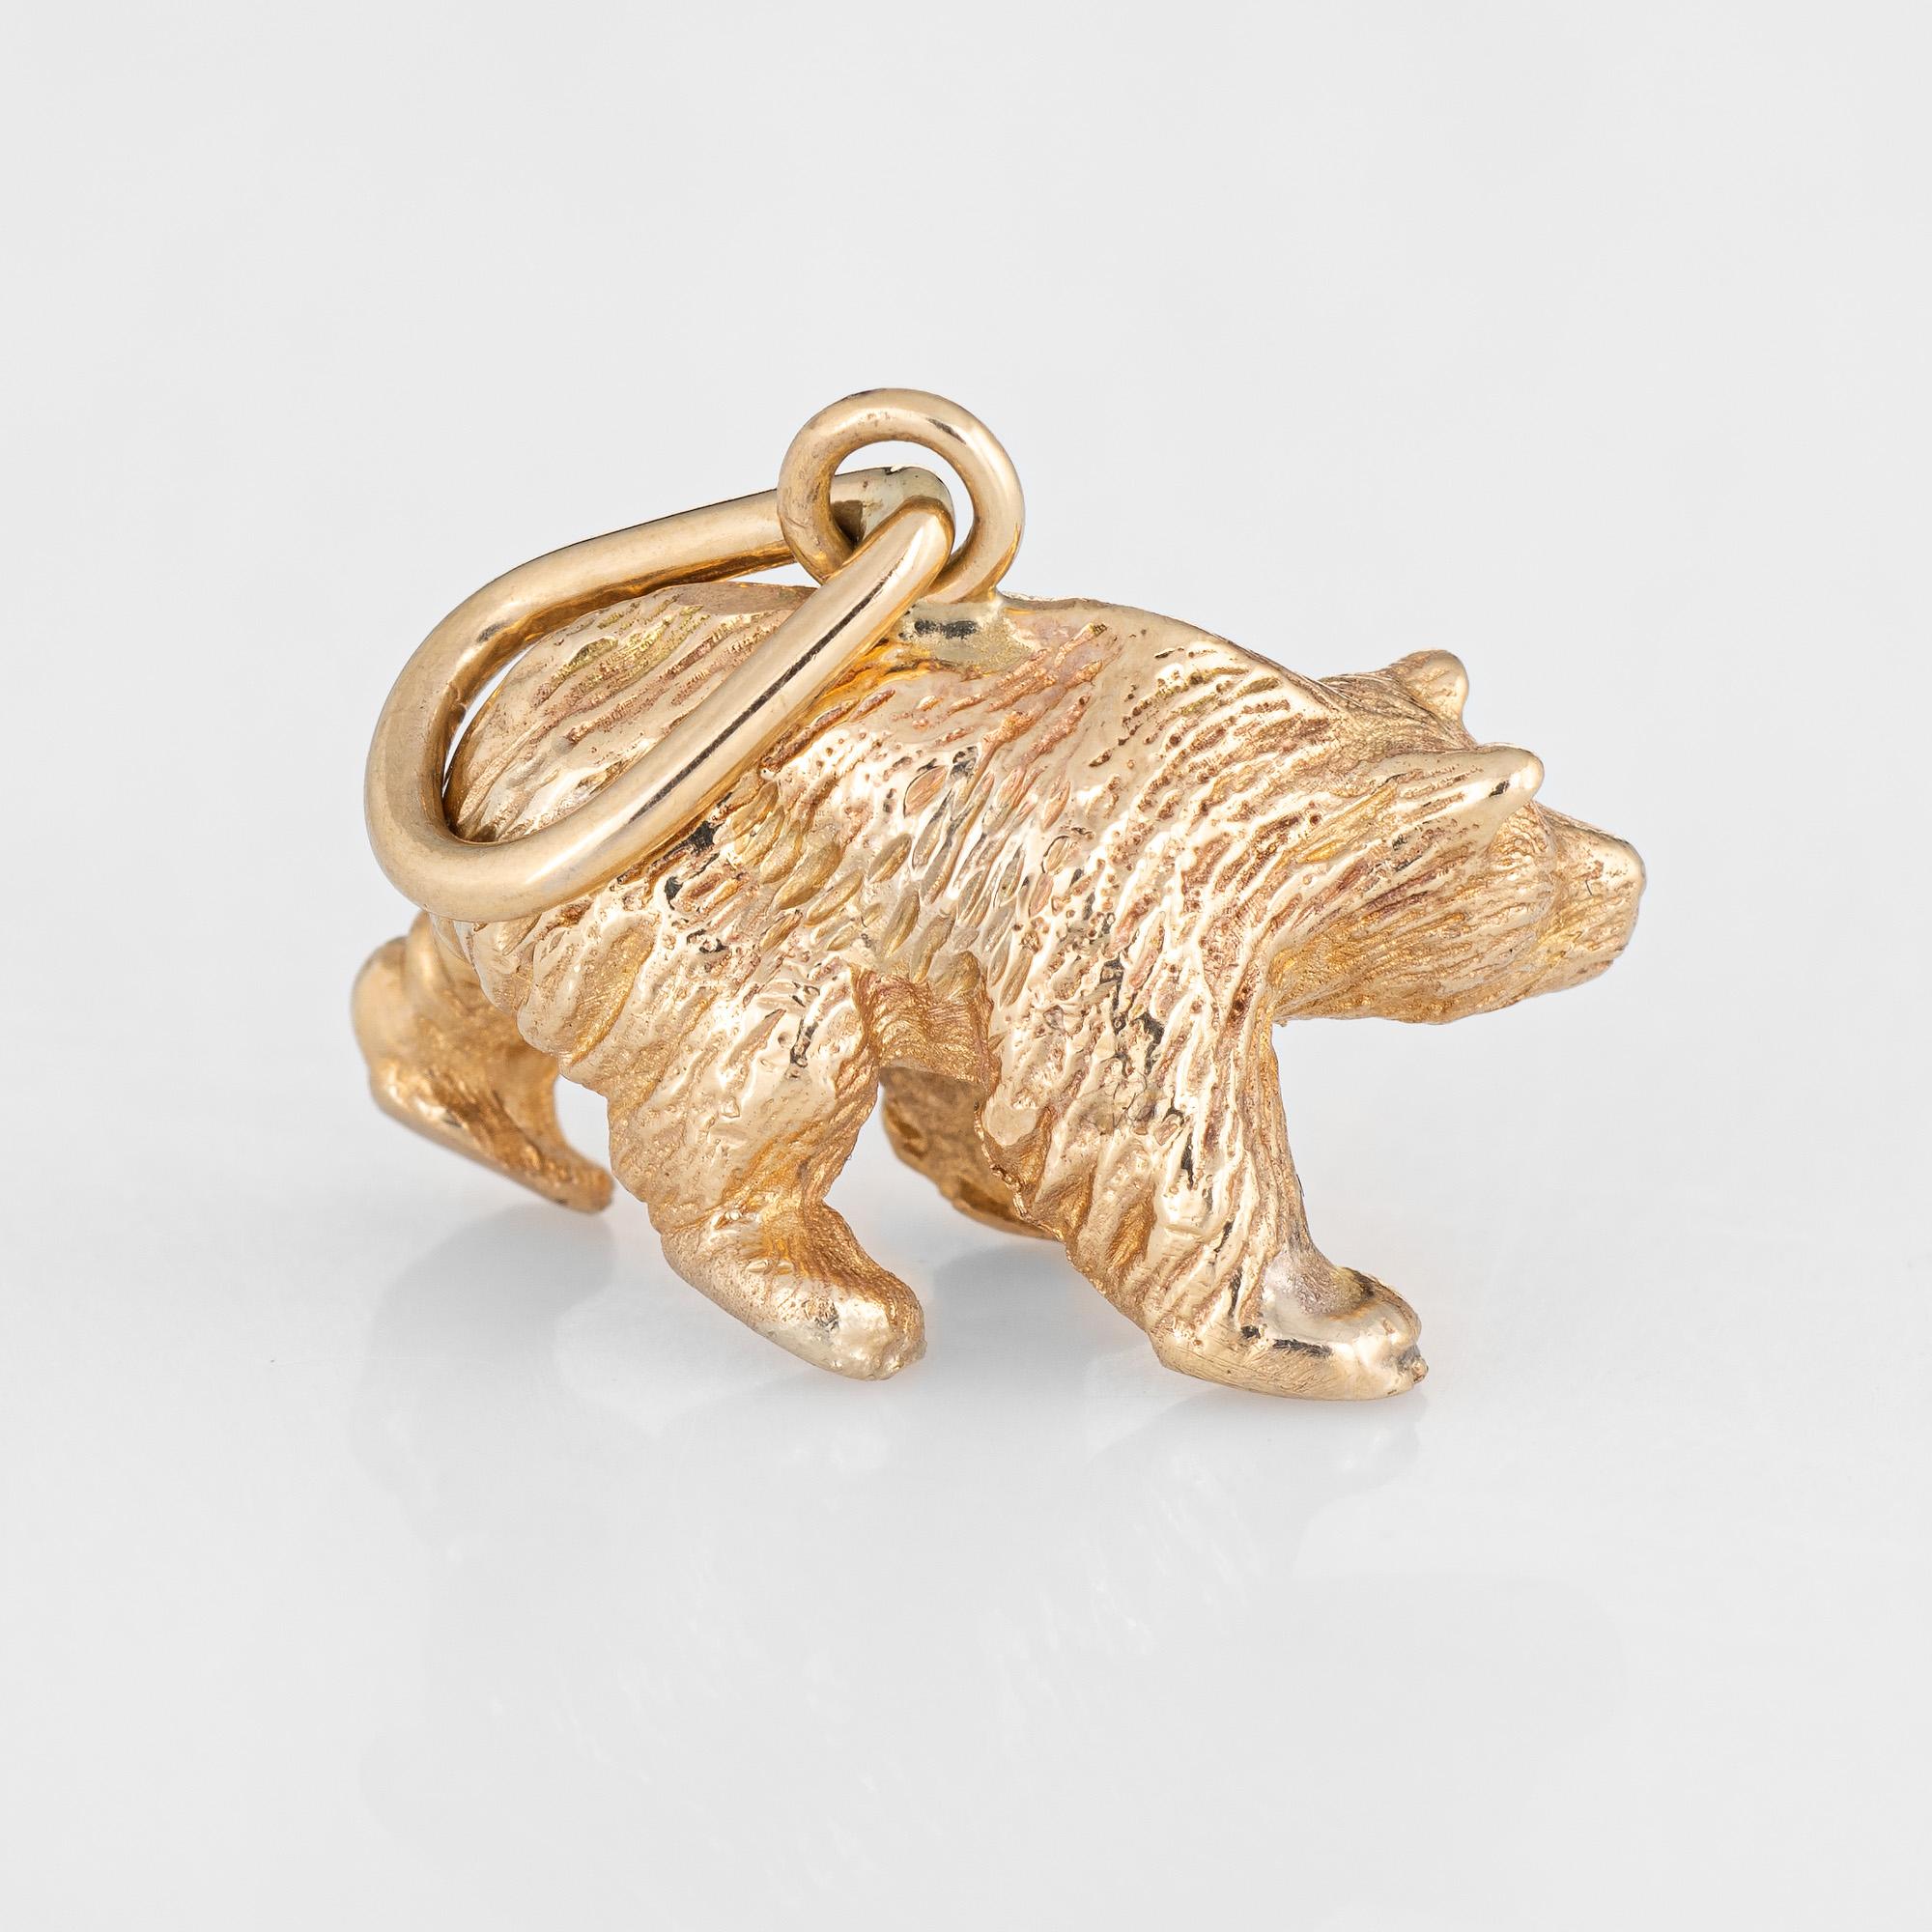 Finely detailed vintage Bear pendant or charm crafted in 14k yellow gold.  

The unique charm features lifelike detail of a Bear with texturing to the entire piece. The bale measures 5mm and can accommodate a thicker chain if desired. The bear is